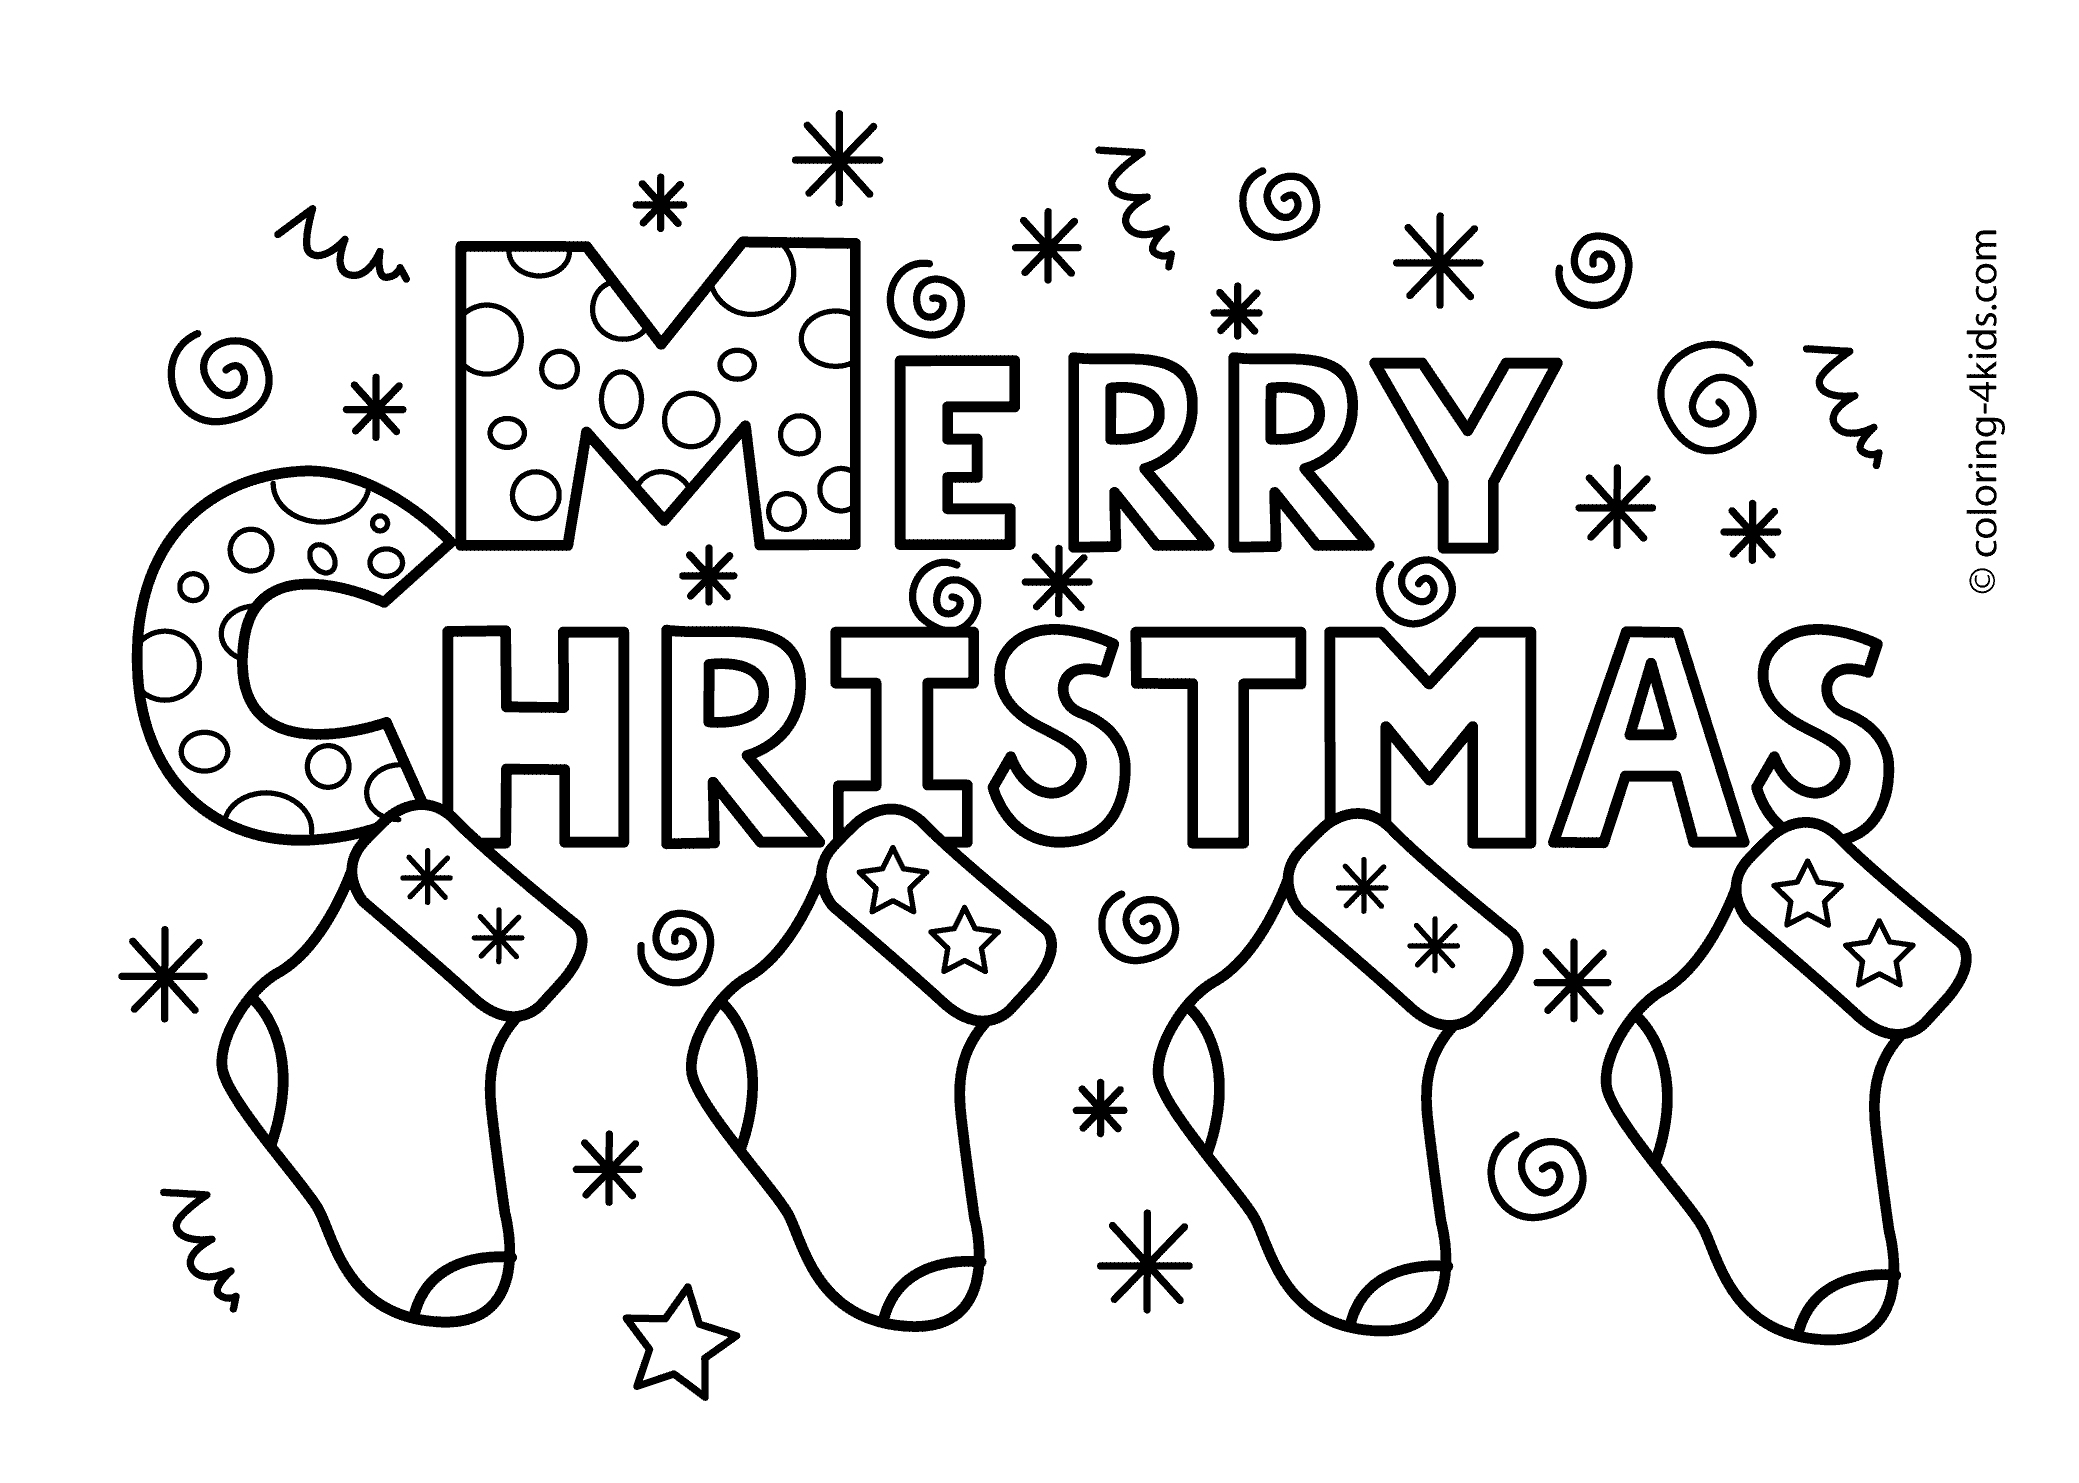 Coloring Pages For Christmas Free Printable - Saglik - Xmas Coloring Pages Free Printable